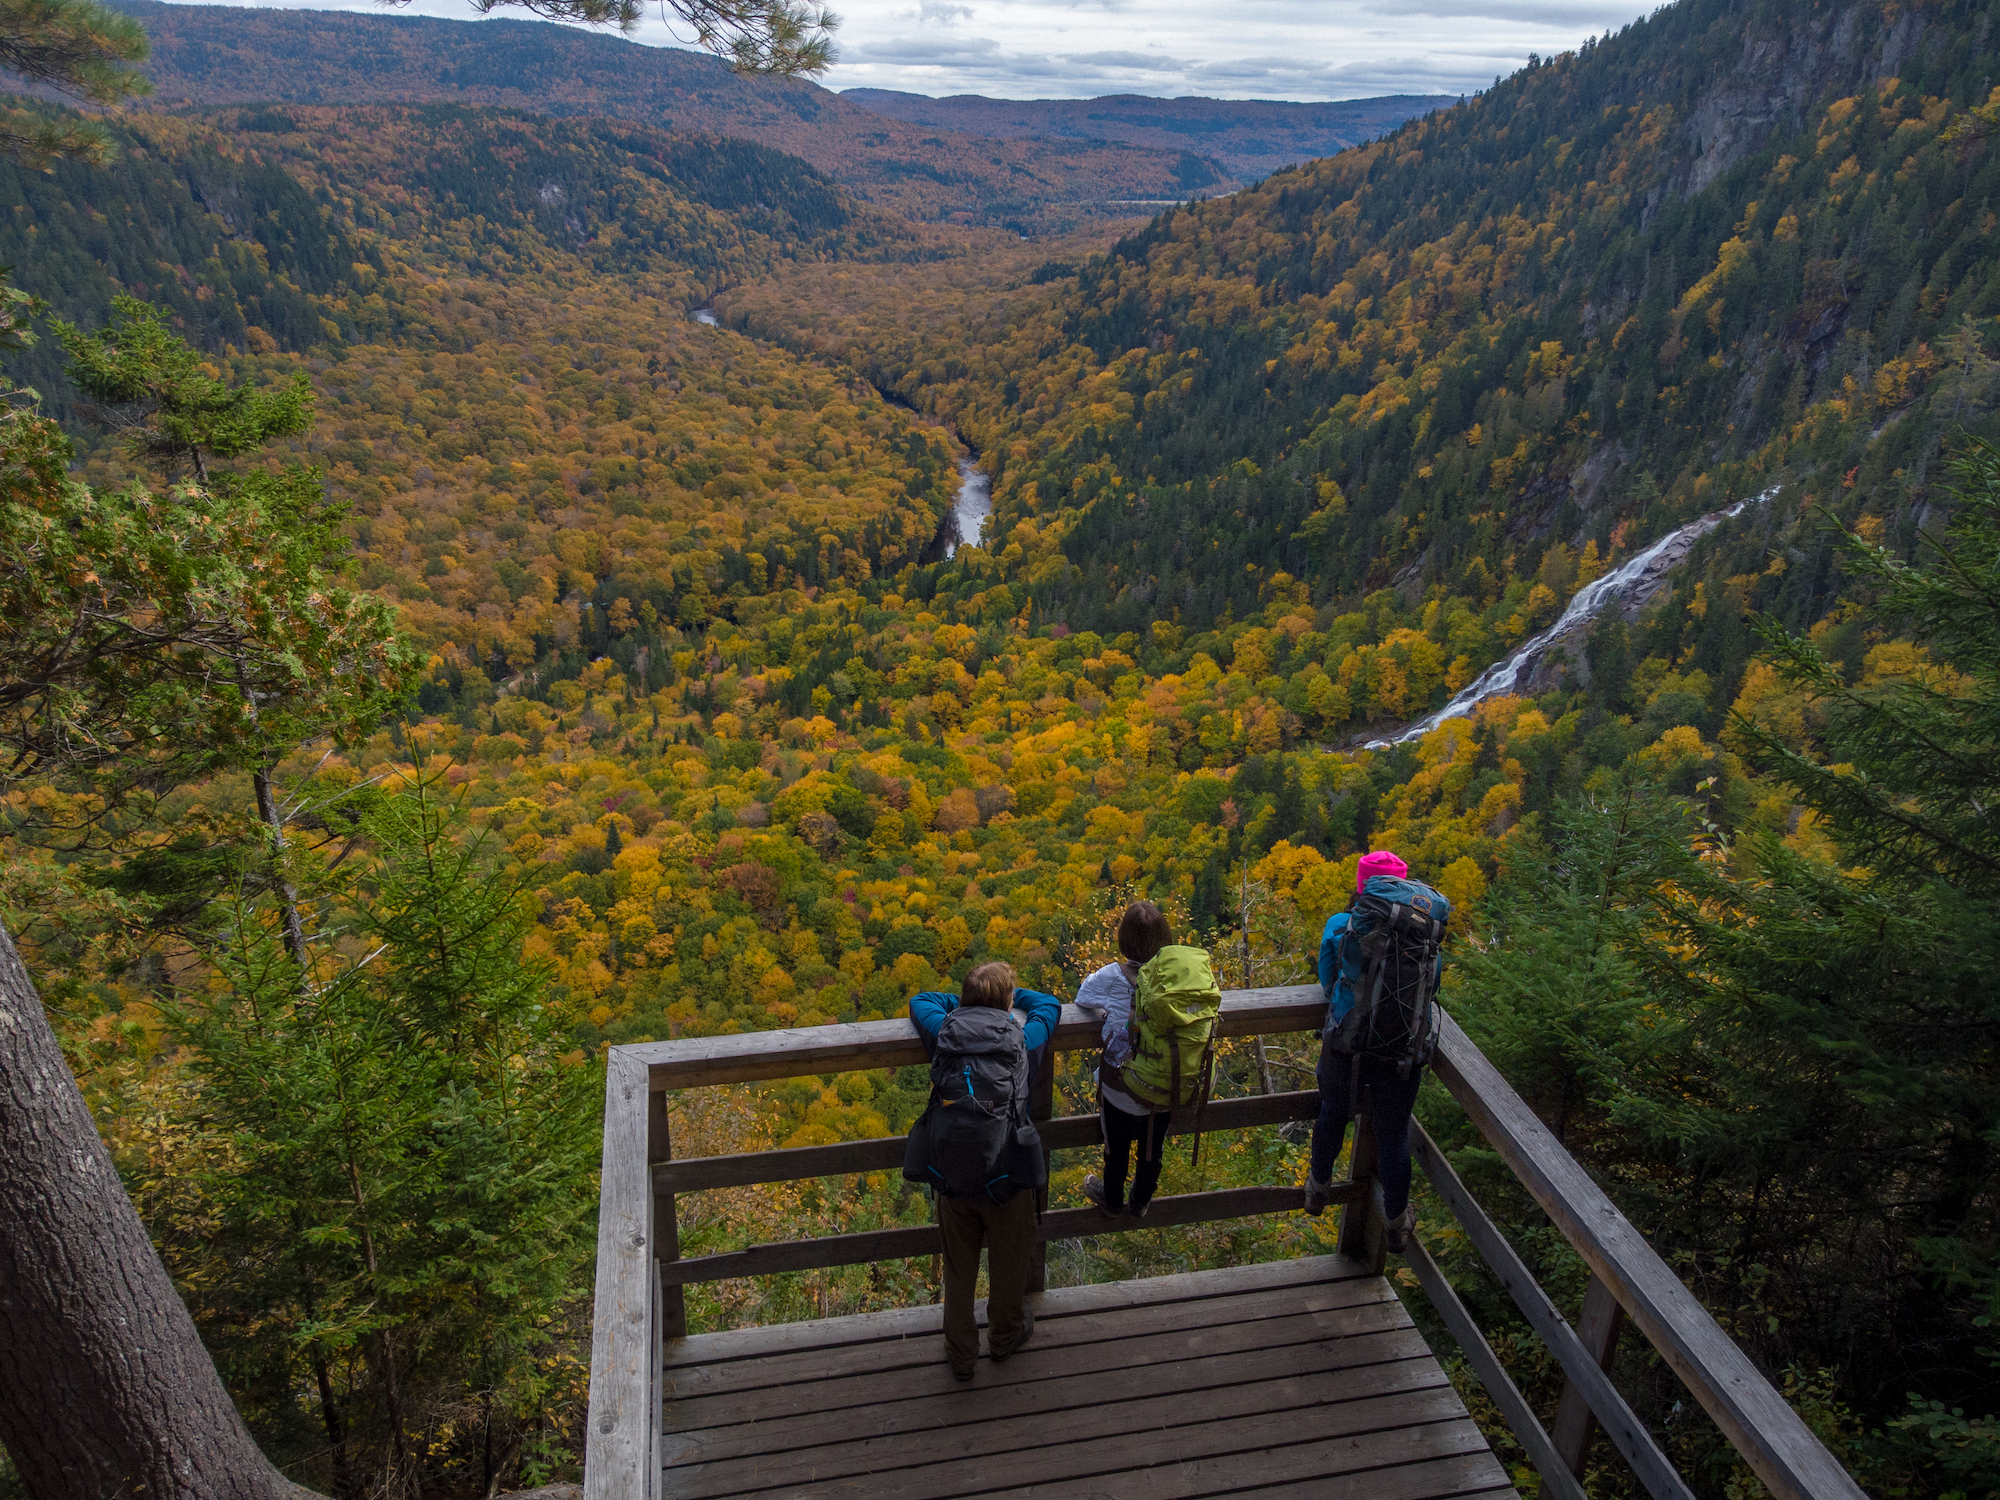 Family admiring the breathtaking scenery from an observatory located on one of the hiking trails available in the Valley, and enjoying the view of mountains, nature and the forest.